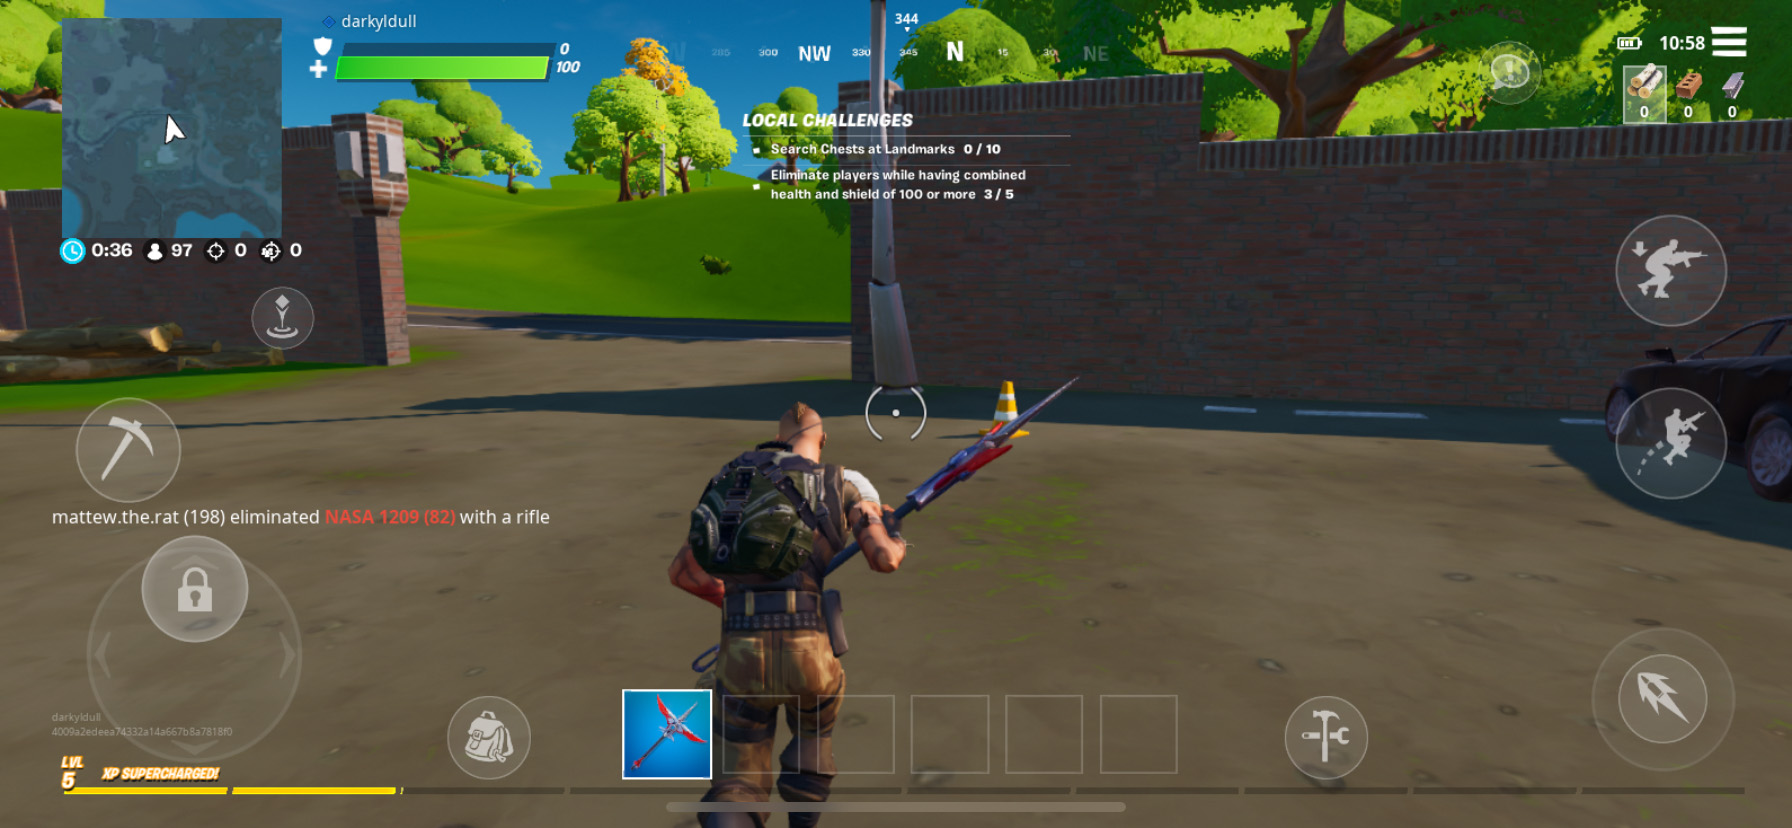 Fortnite Mobile for Android – How to Score the Best Loot and Gear Up